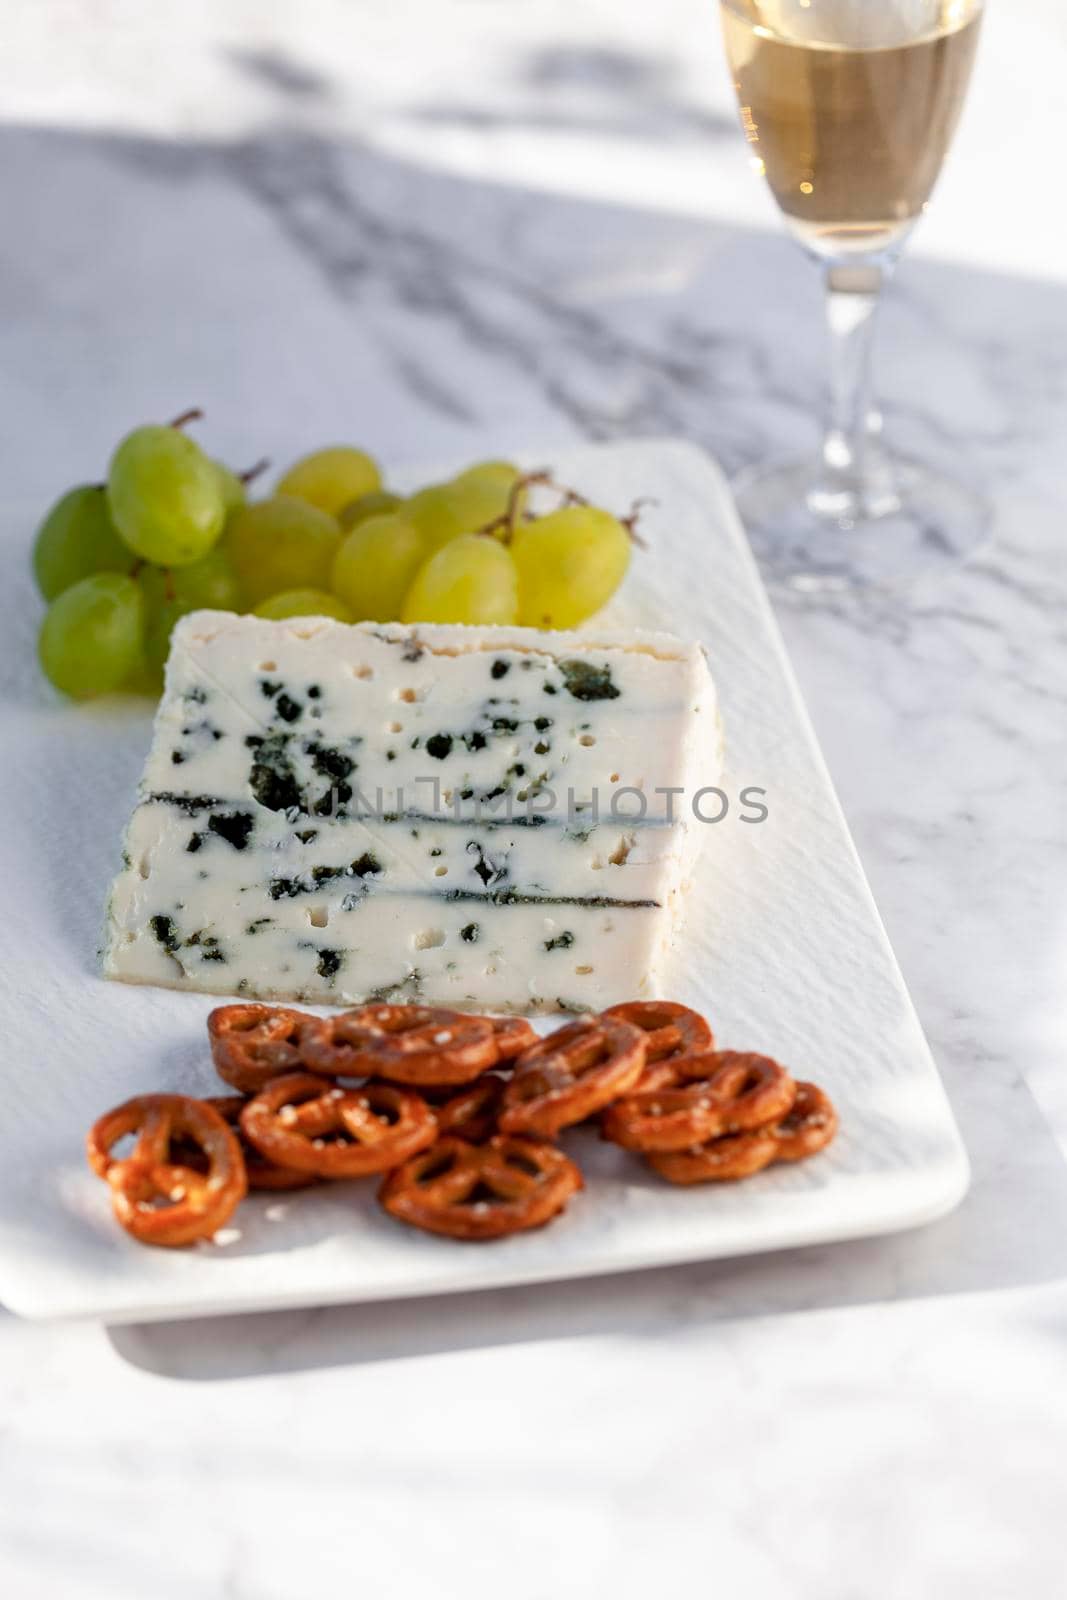 roquefort cheese served with green grapes and snacks outdoors, hard light